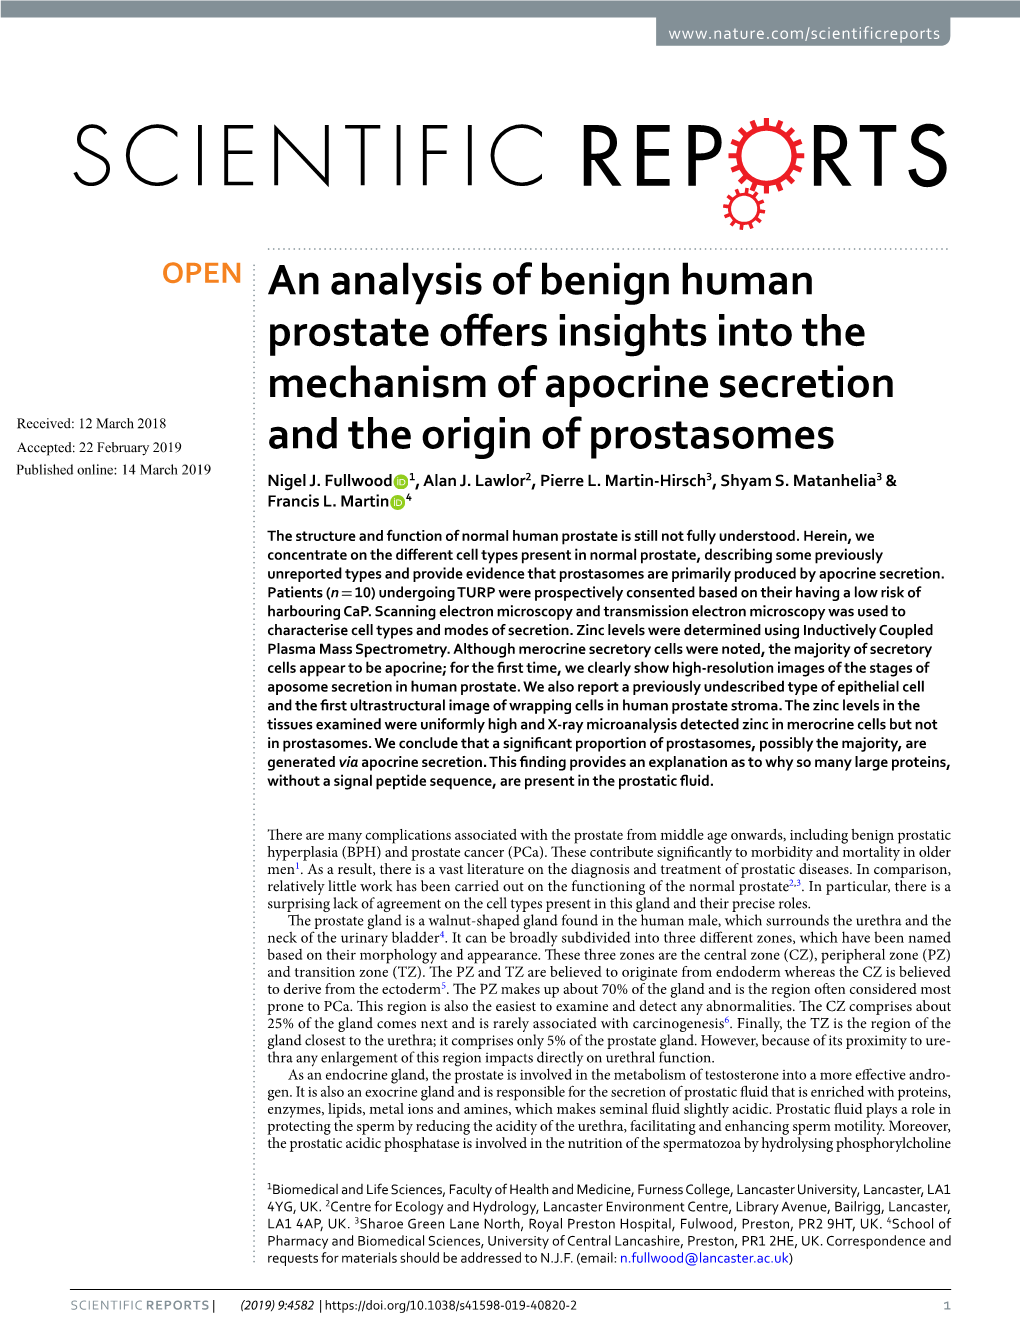 An Analysis of Benign Human Prostate Offers Insights Into the Mechanism